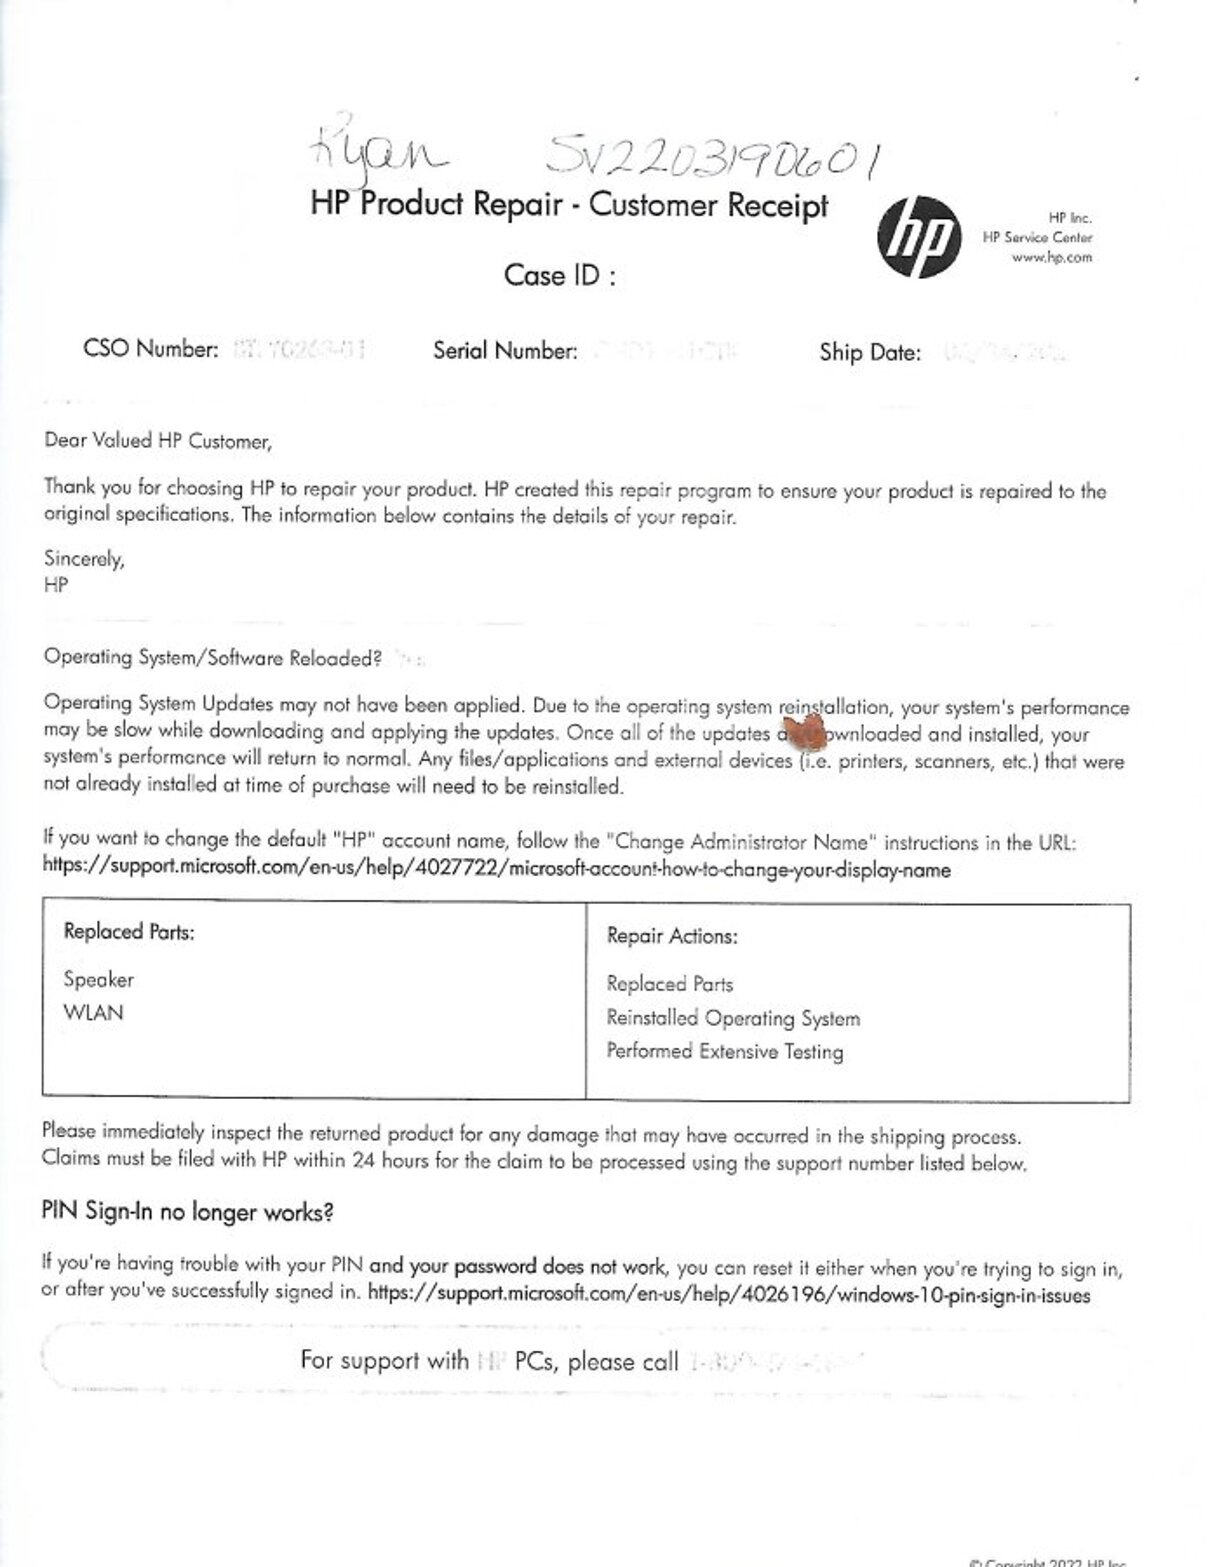 Complaint-review: HP - HP computer service is the worst in the world!. Photo #3